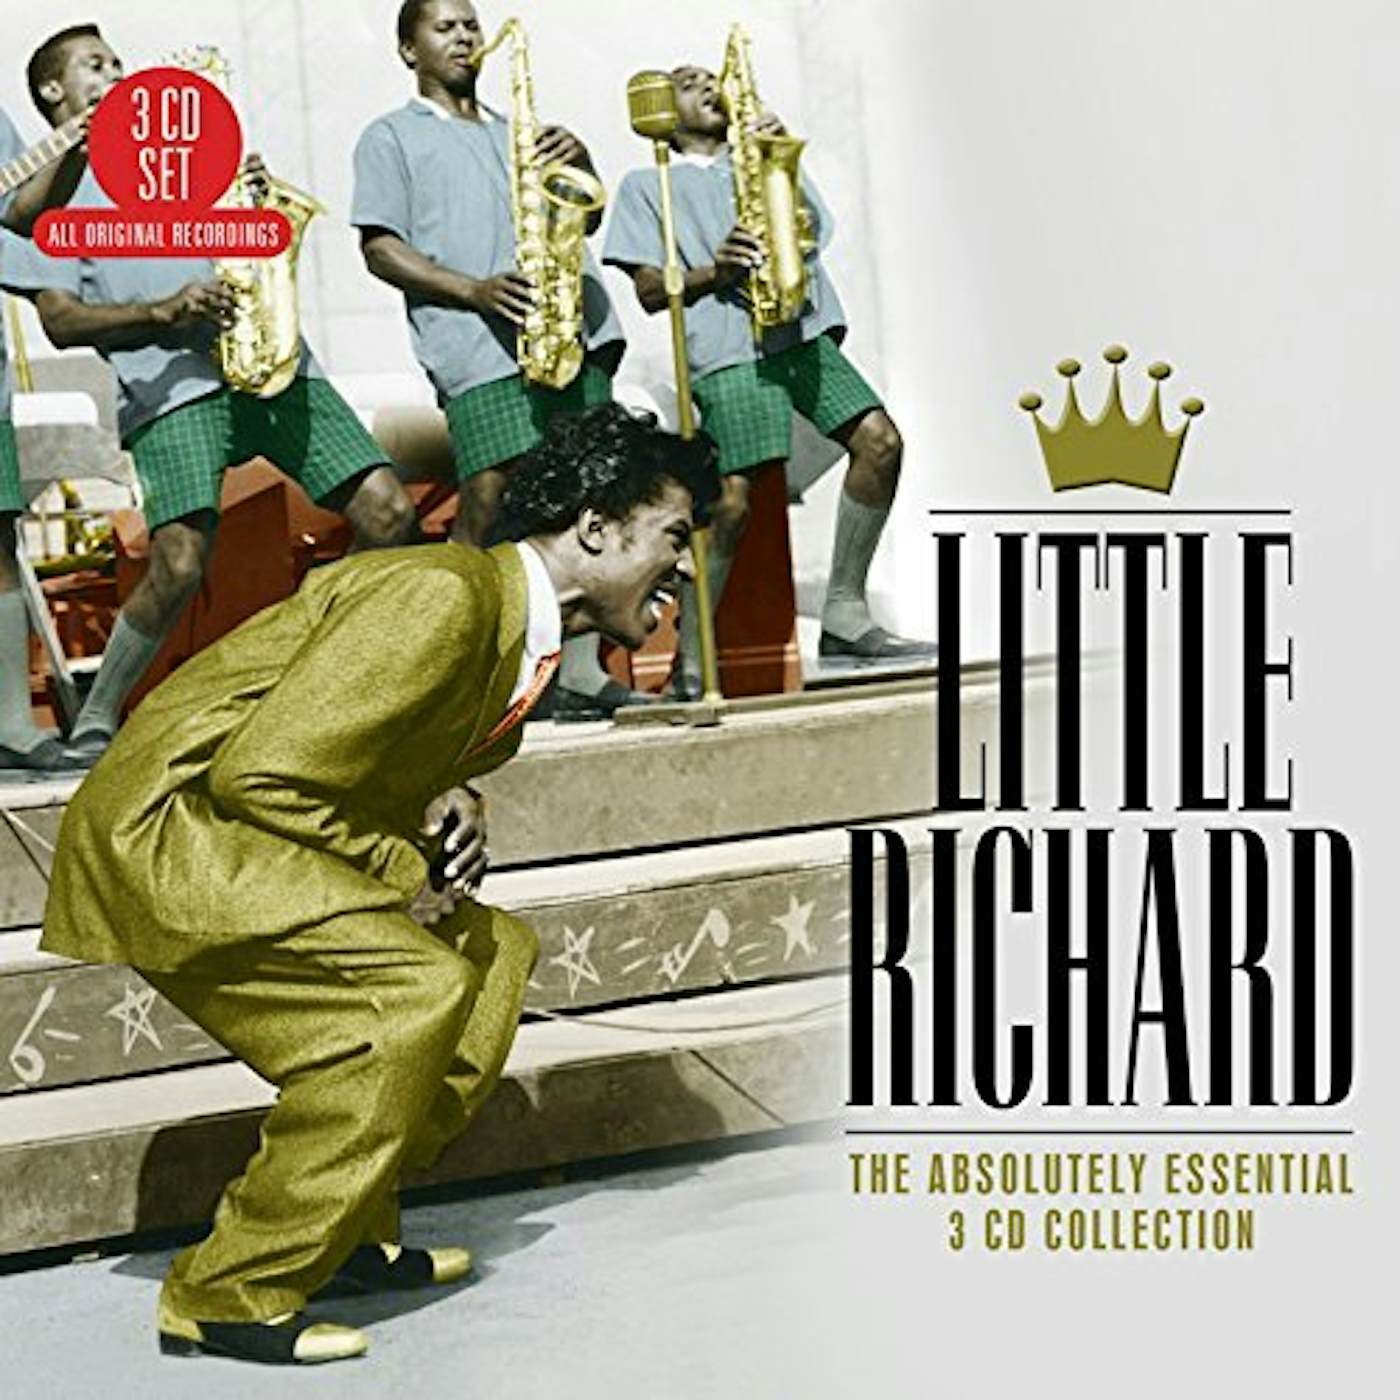 Little Richard ABSOLUTELY ESSENTIAL 3 CD COLLECTION CD